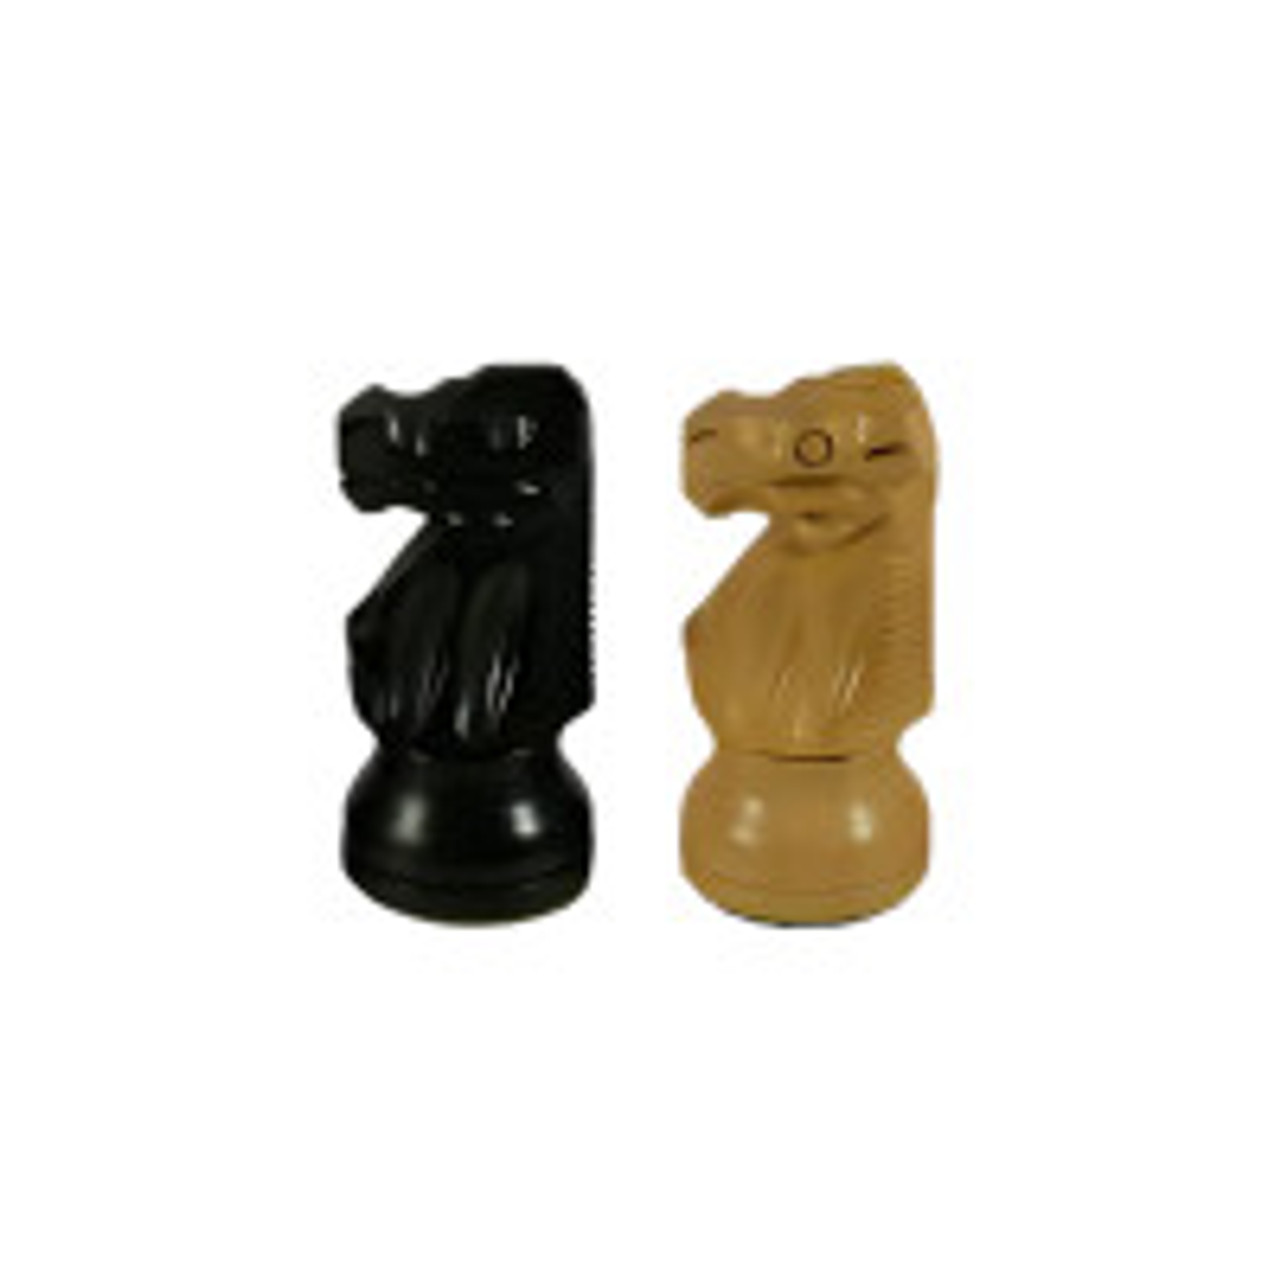 The Aurore Chess Pieces - Black and Boxwood with 3.5" King black and white knights